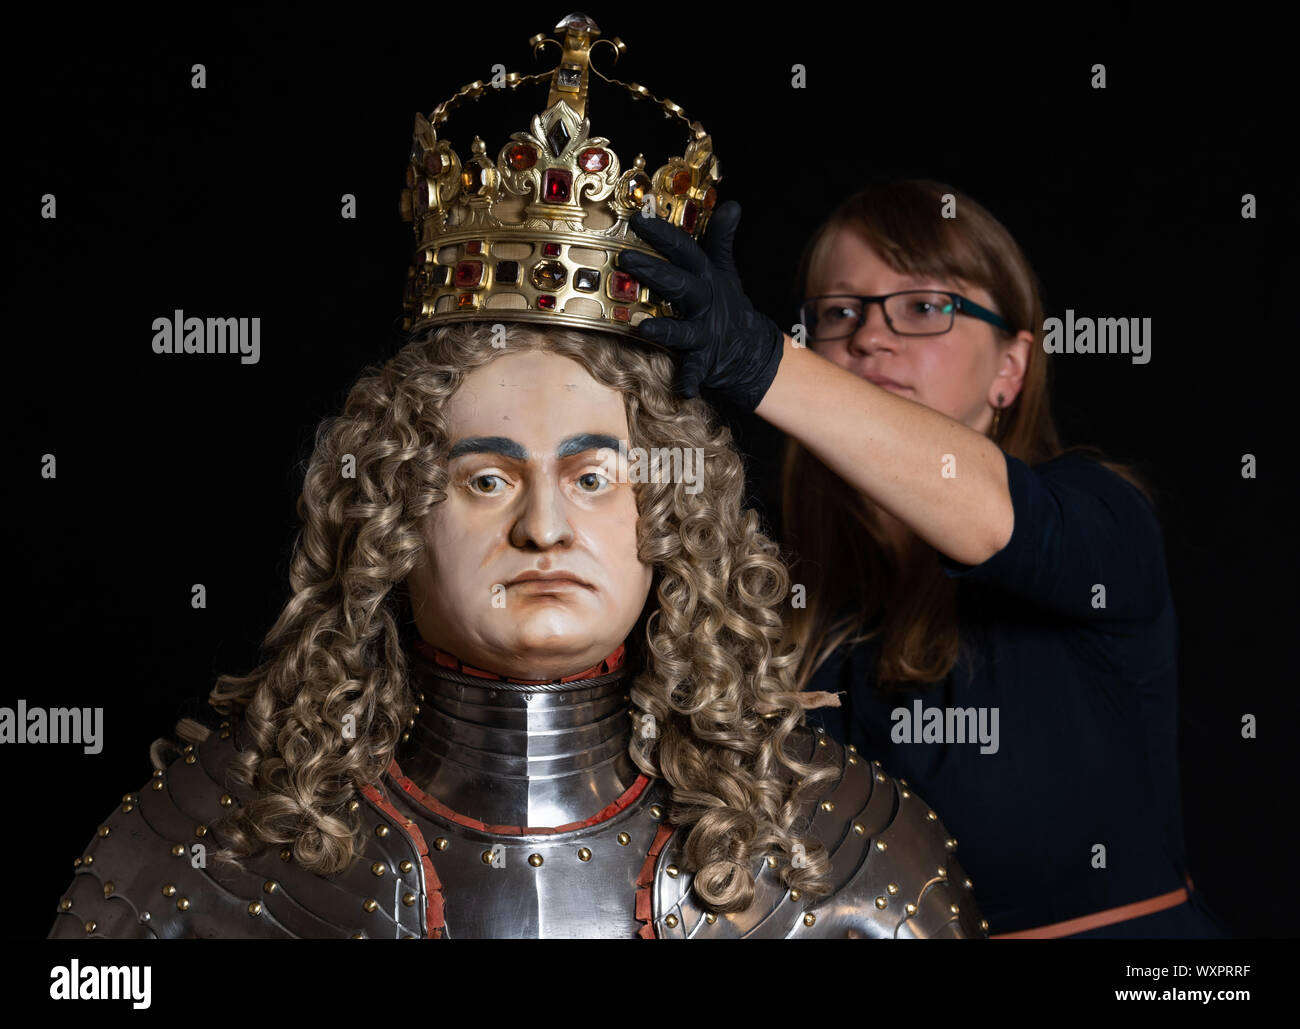 Dresden, Germany. 15th Aug, 2019. Stefanie Penthin, restorer in the armoury of the Staatliche Kunstsammlungen Dresden (SKD), crowned the coronation figure of August the Strong in the coronation ornament of 1697. The figure will be an exhibit of the new exhibition in the Royal Parade Rooms of the Residence Palace. Credit: Robert Michael/dpa-Zentralbild/dpa/Alamy Live News Stock Photo